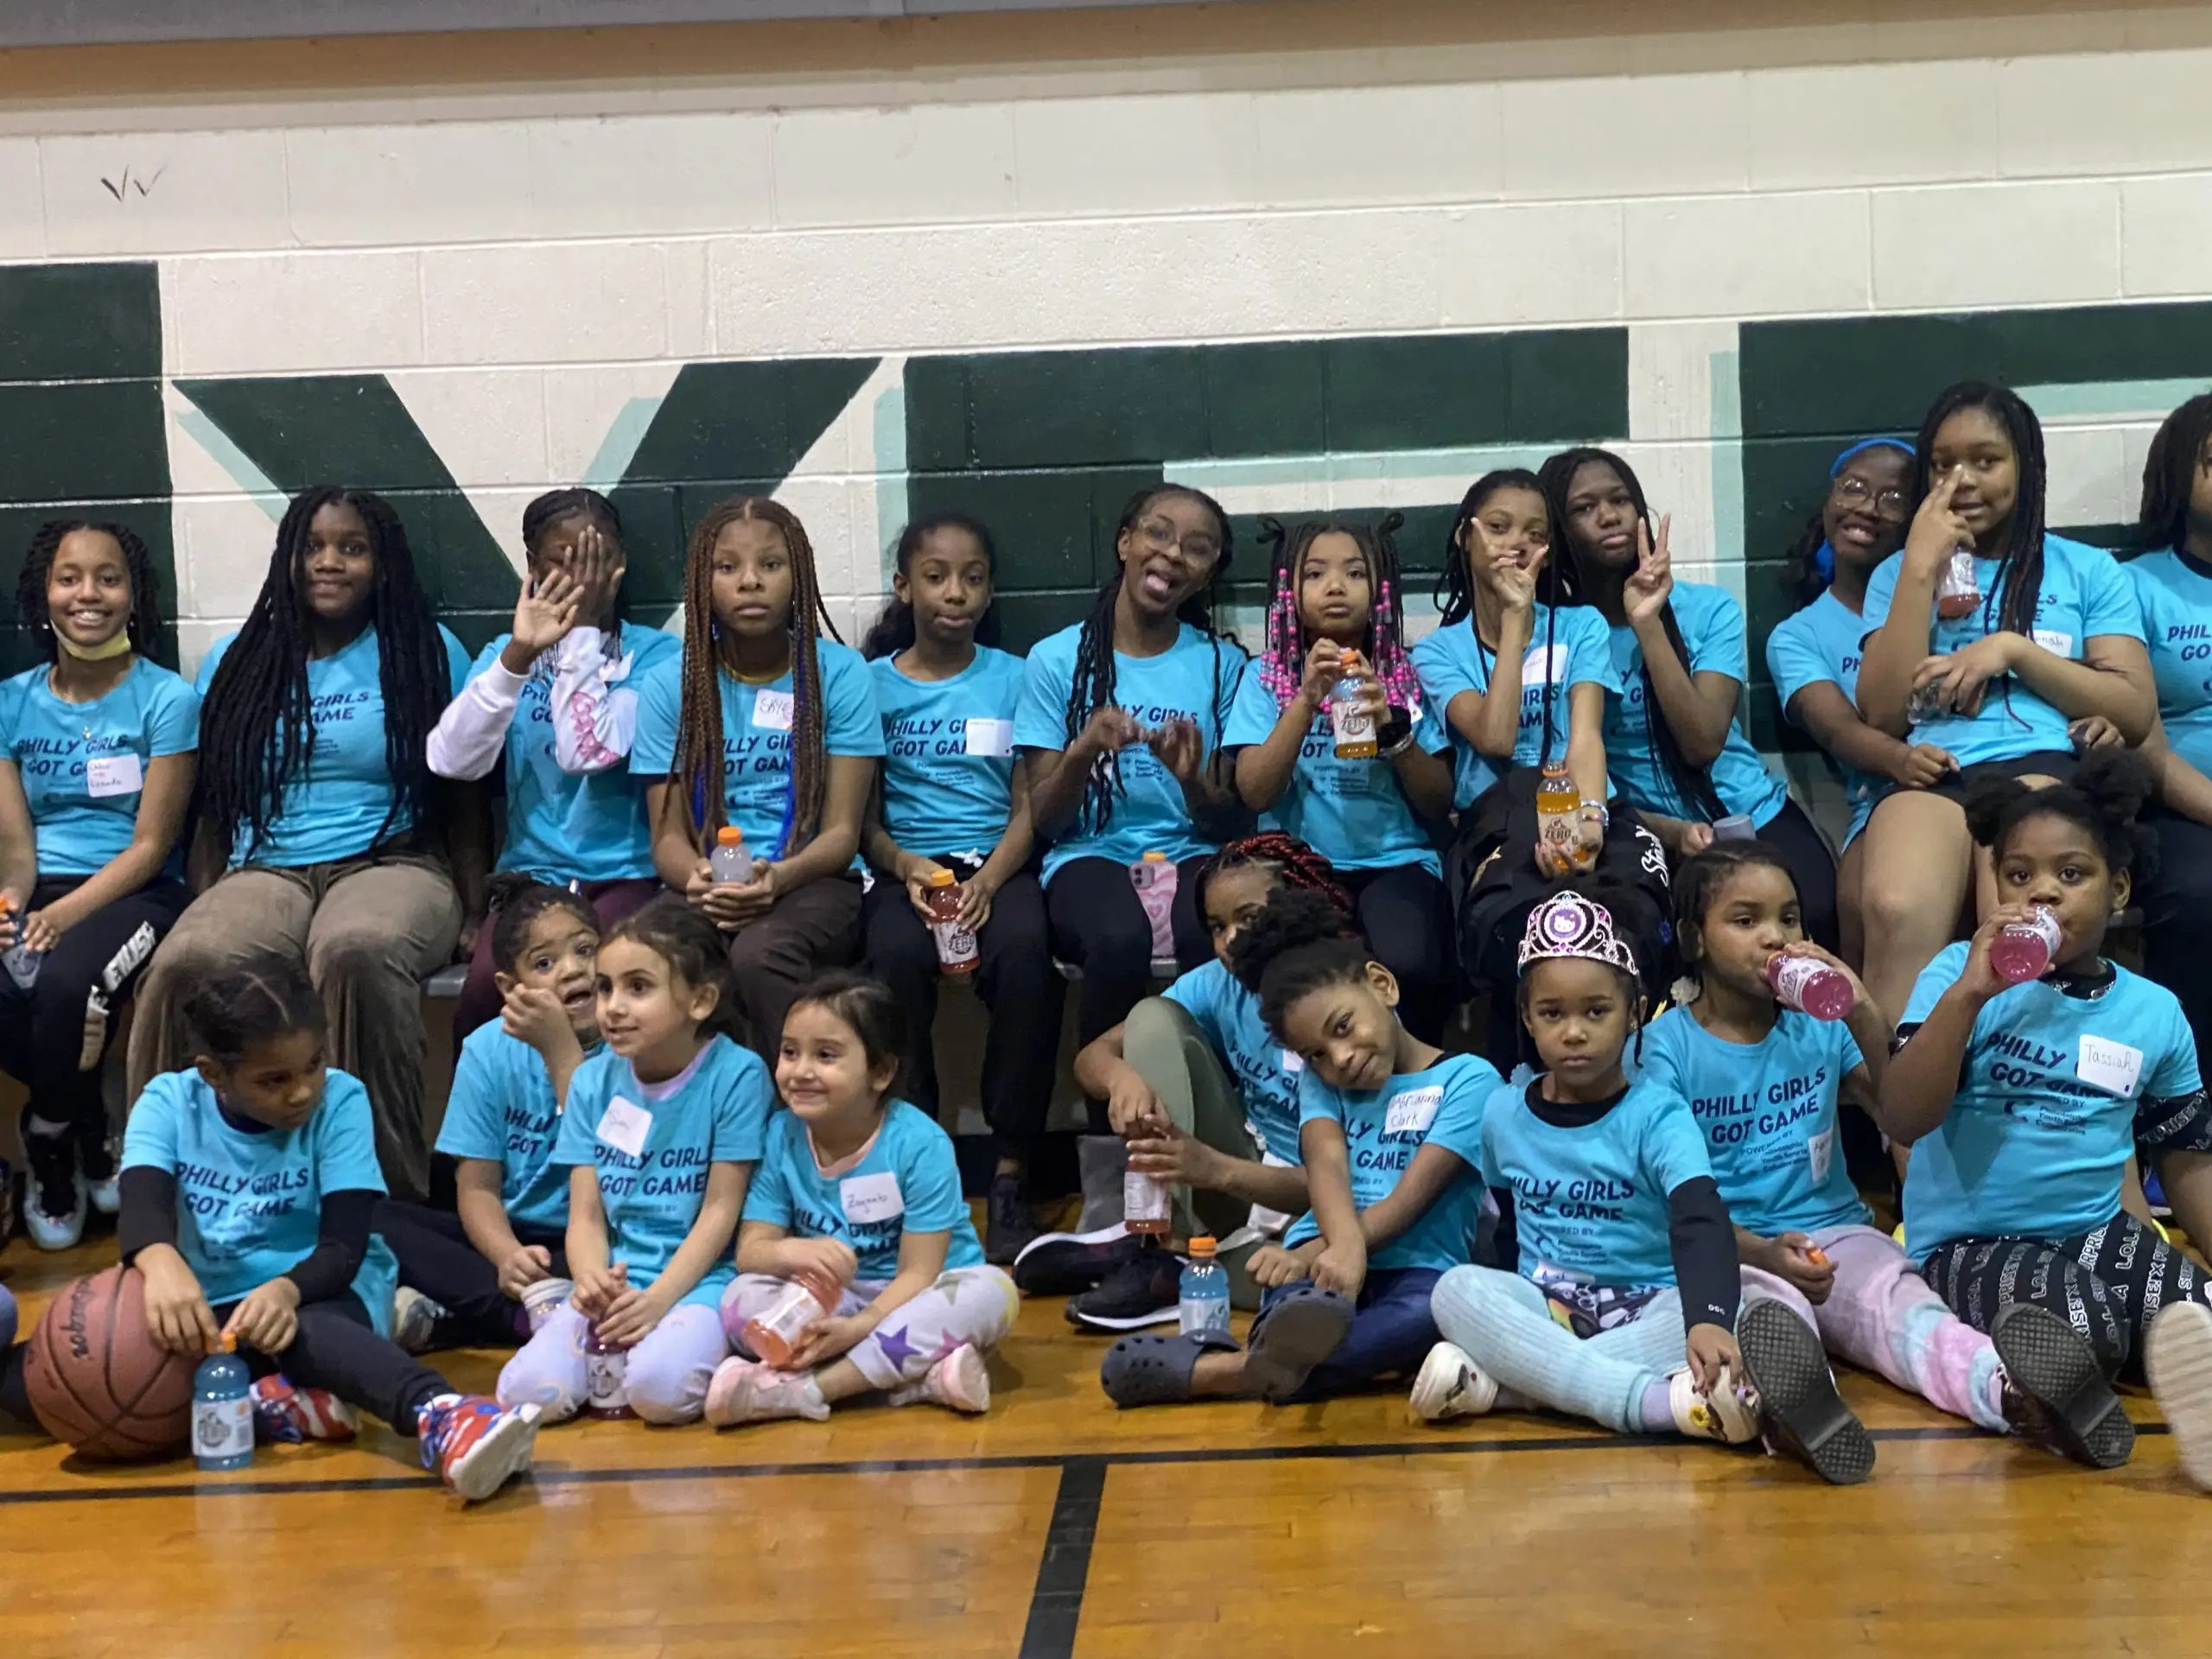 Featured image: TeamSnap Impact Spends The Day at Philly Girls Got Game Event